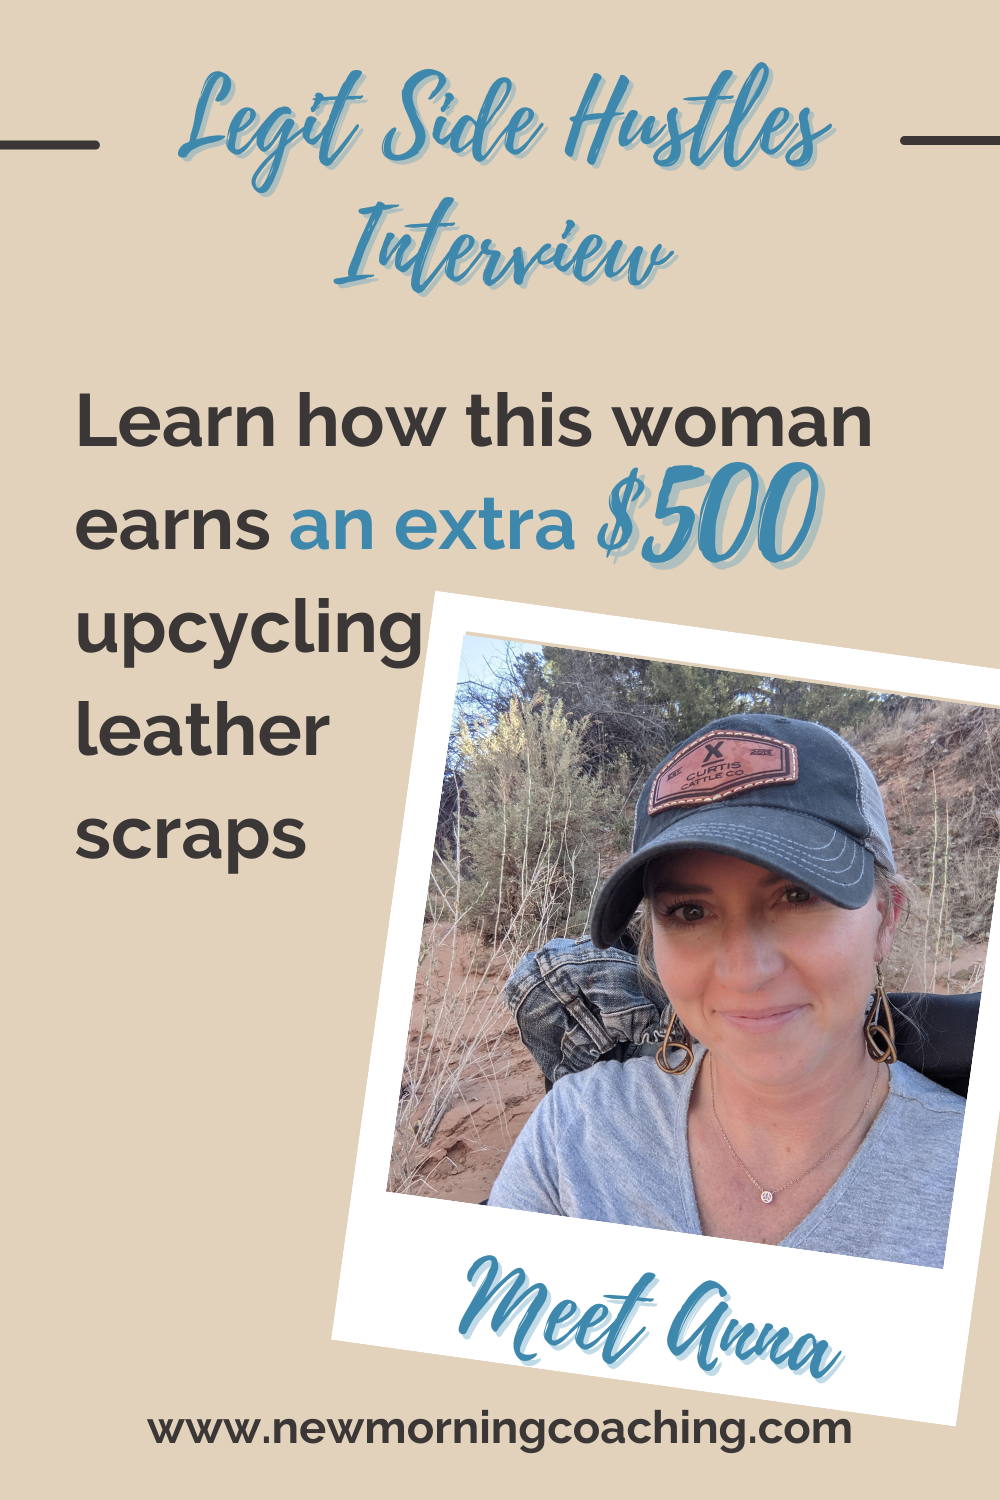 Legit side hustle interviews: learn how this woman earns an extra $500 upcycling leather scraps